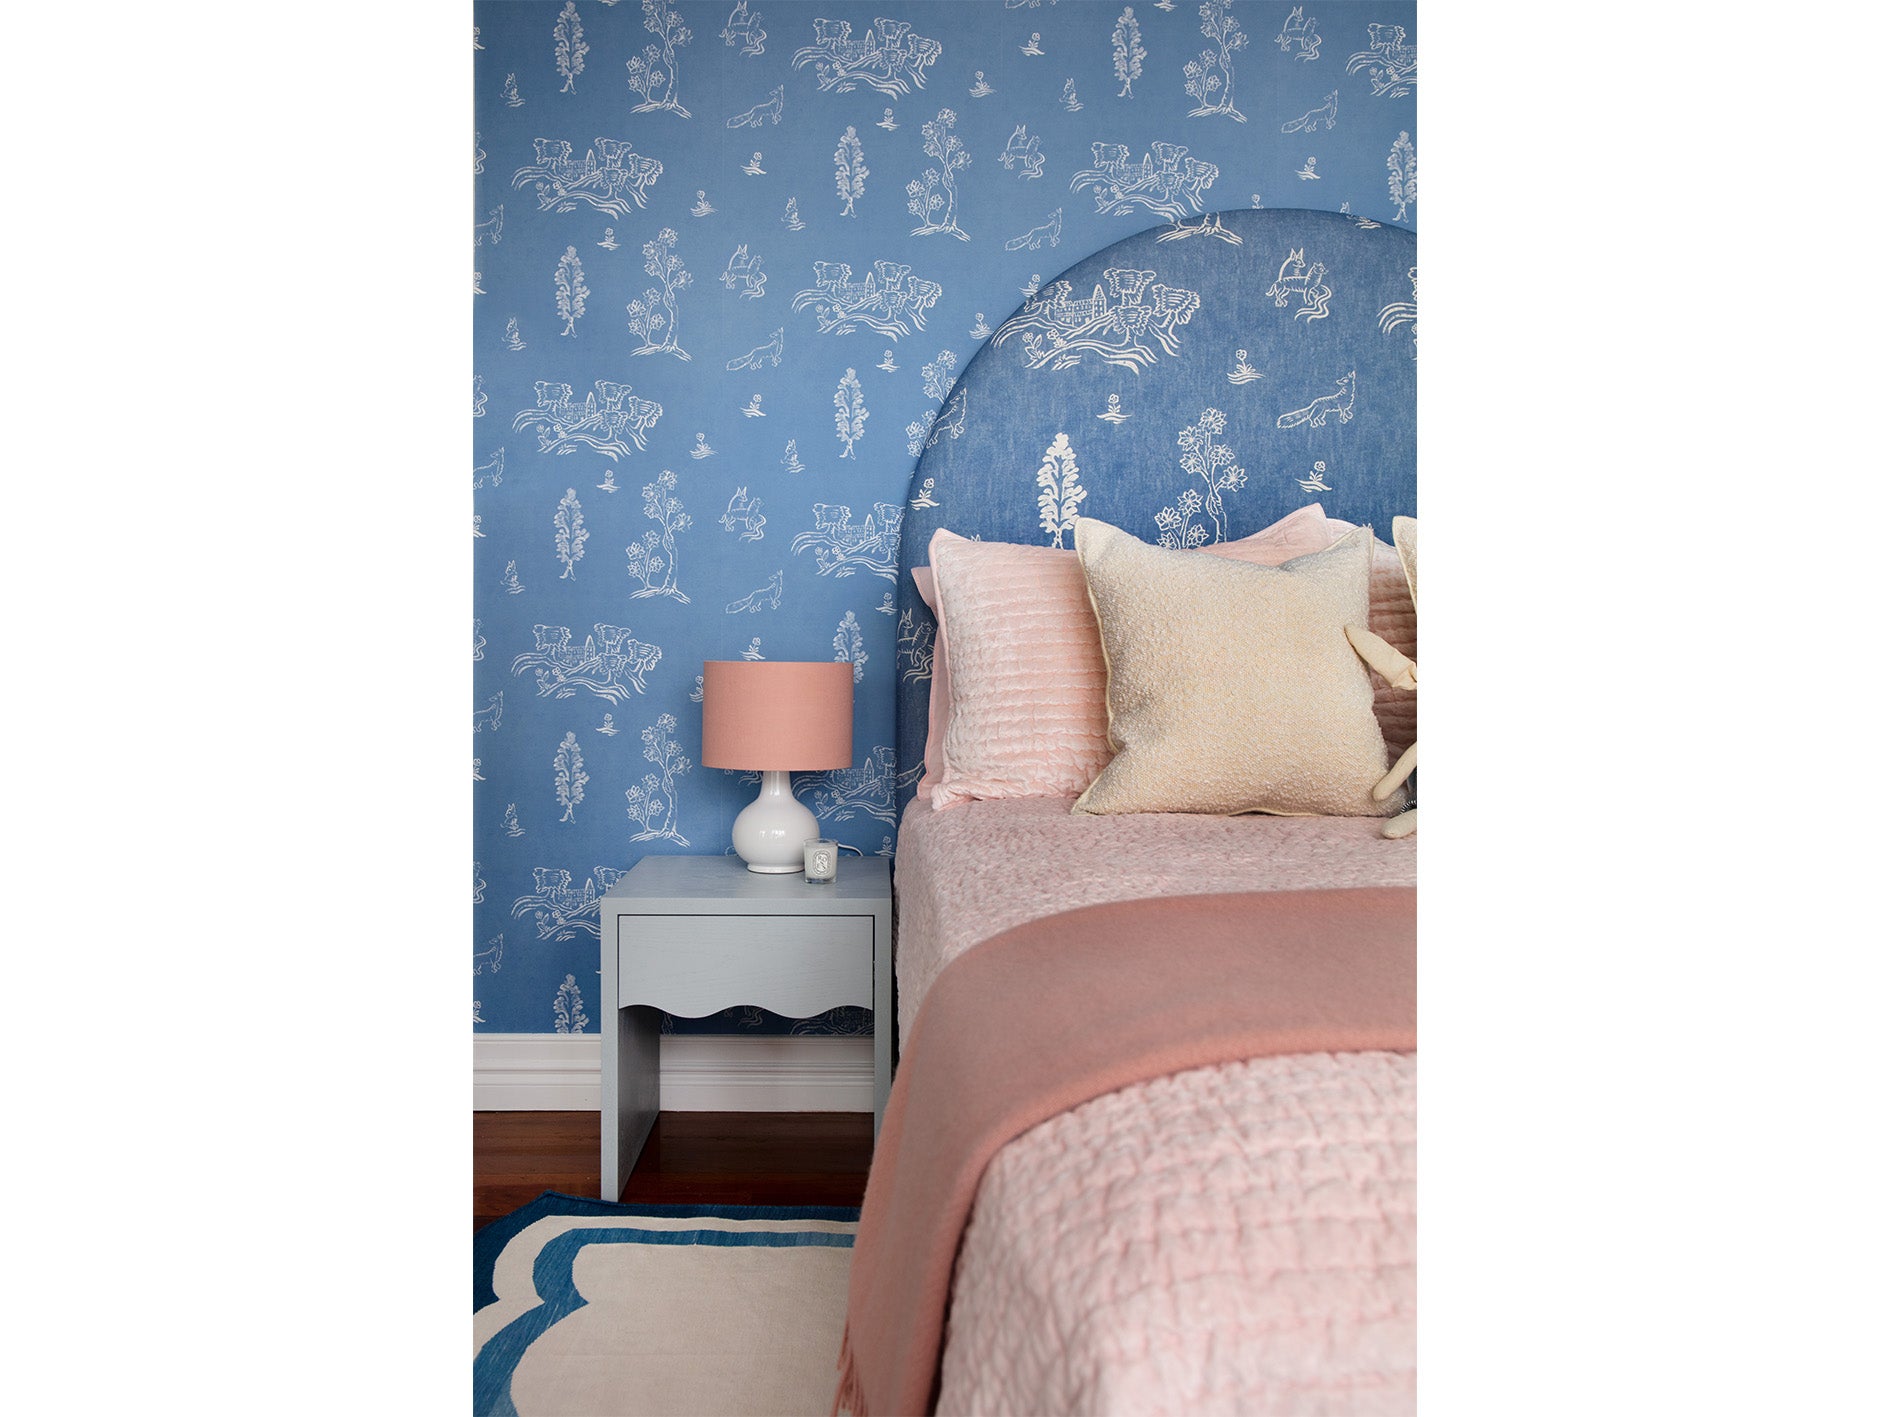 Little Girls Bedroom with Blue Wallpaper and Pink Bedding